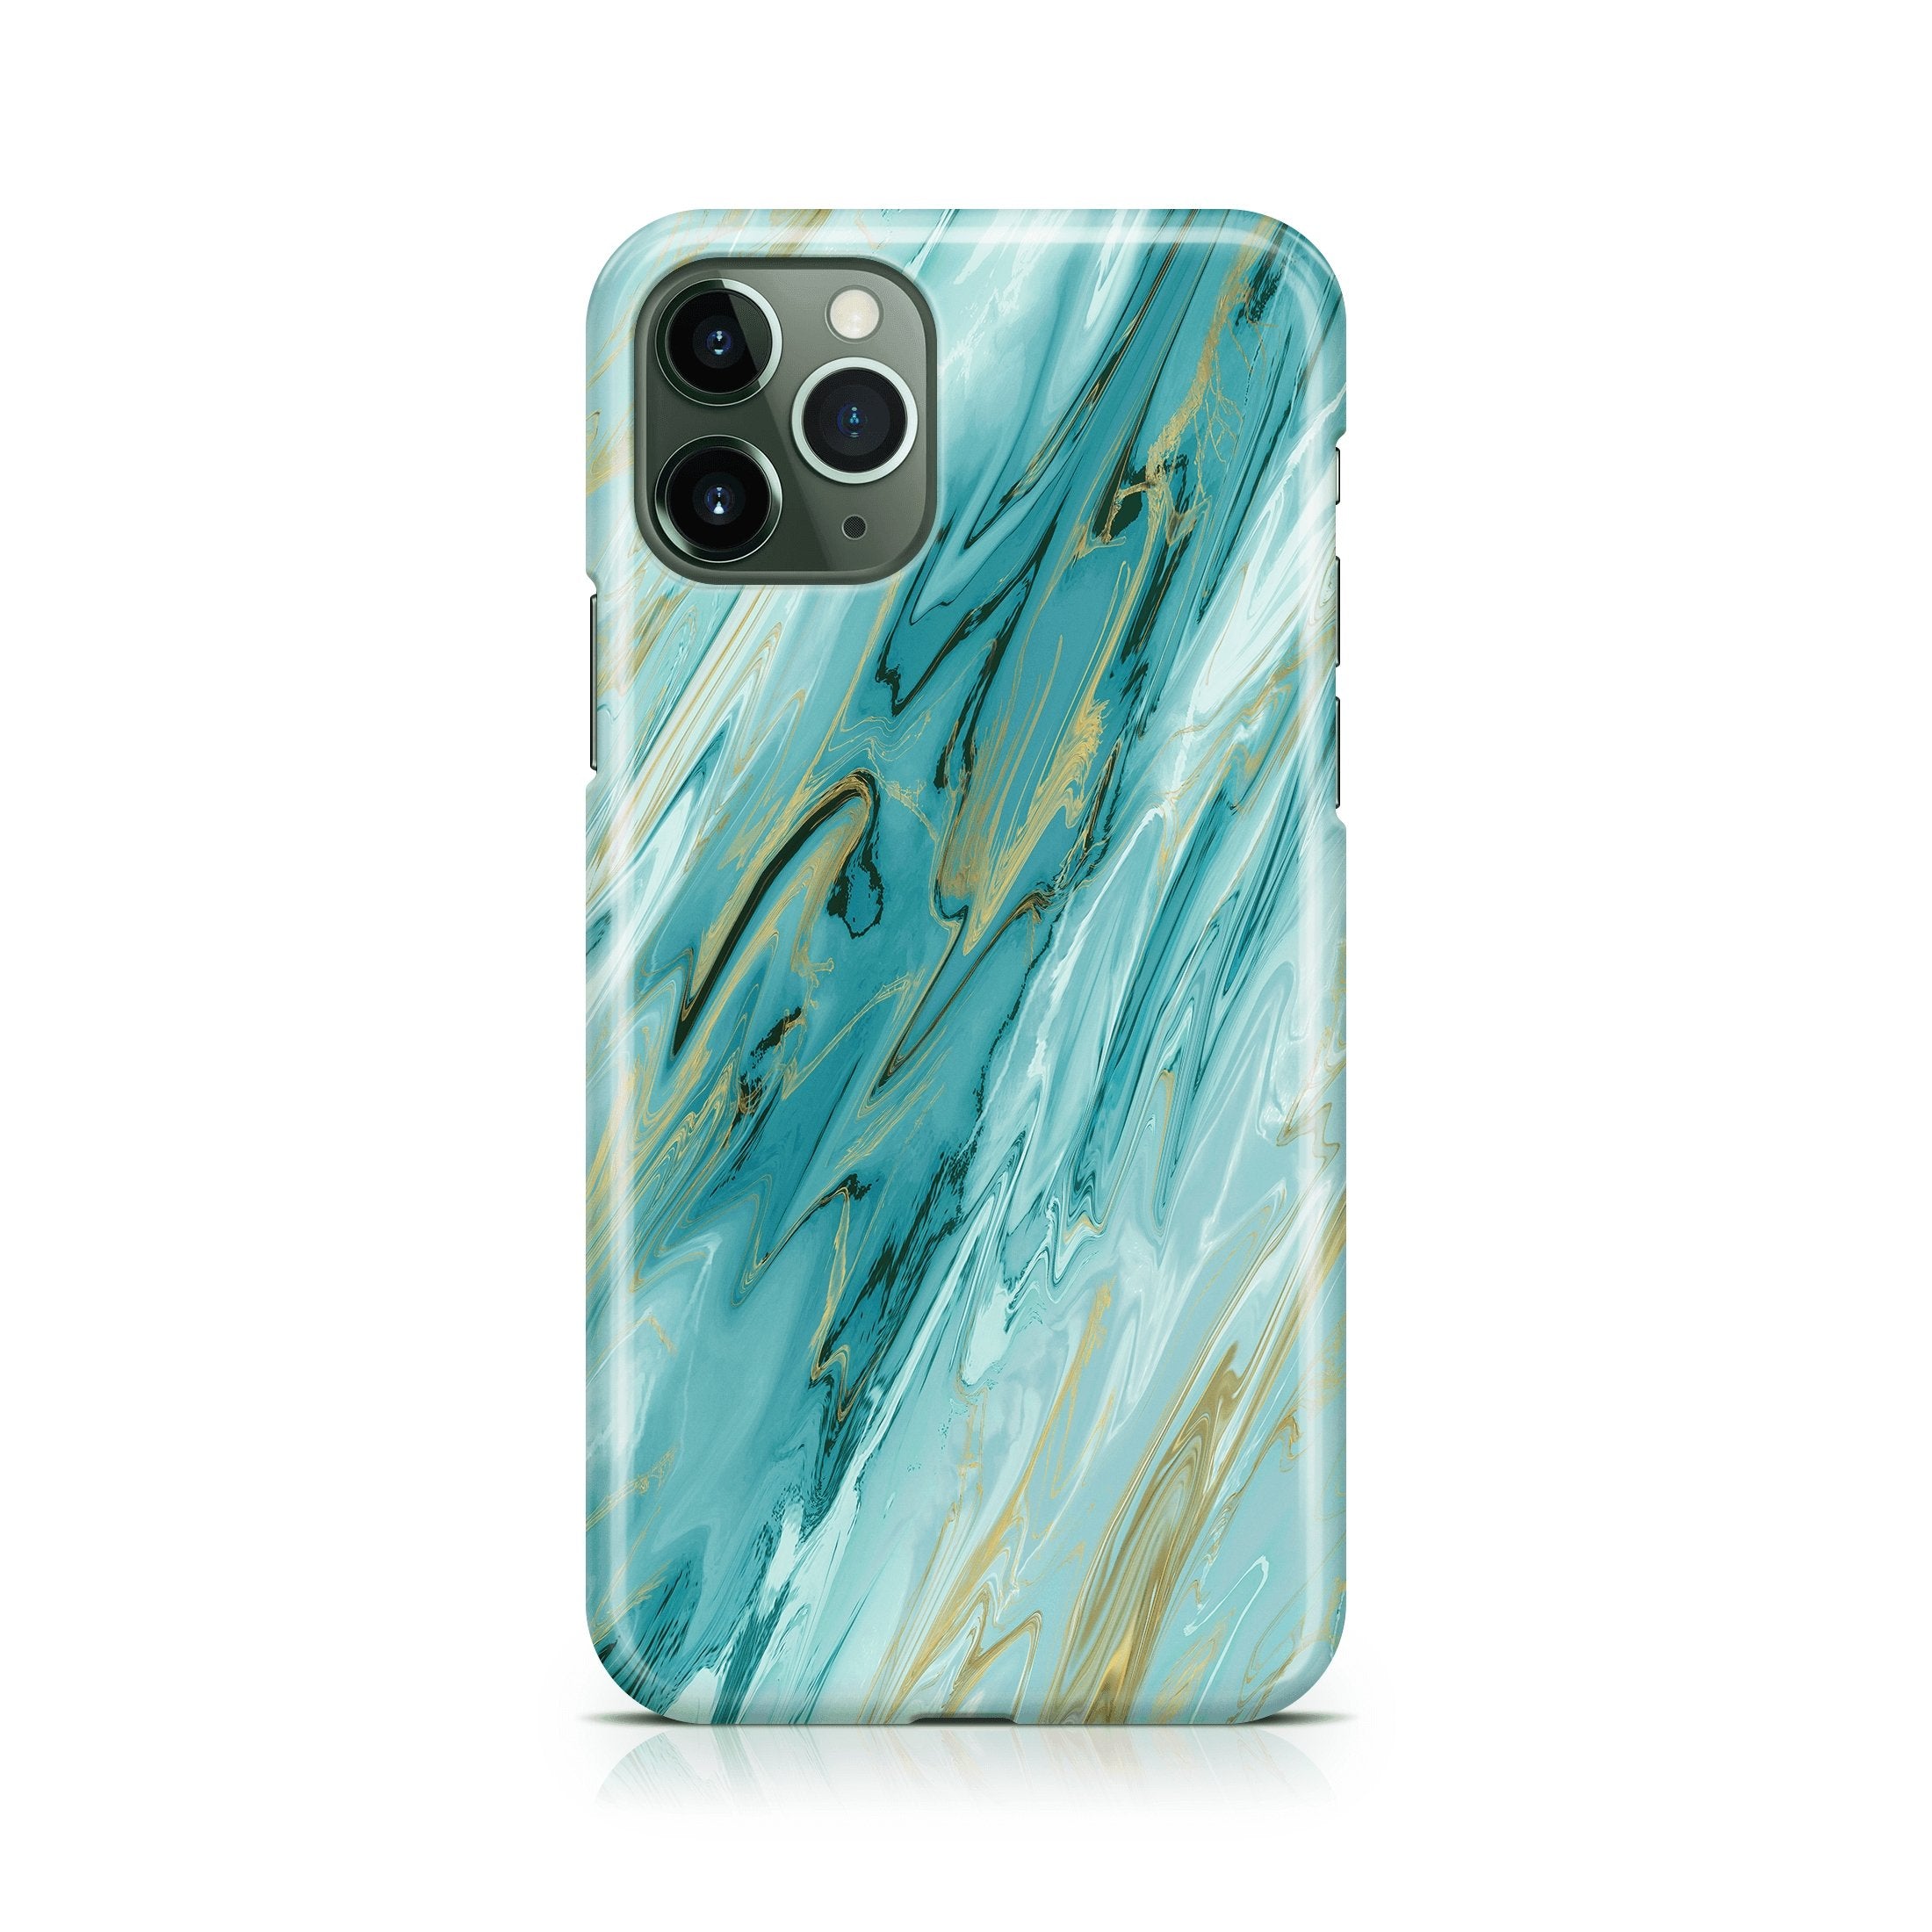 Turquoise & Gold Agate - iPhone phone case designs by CaseSwagger